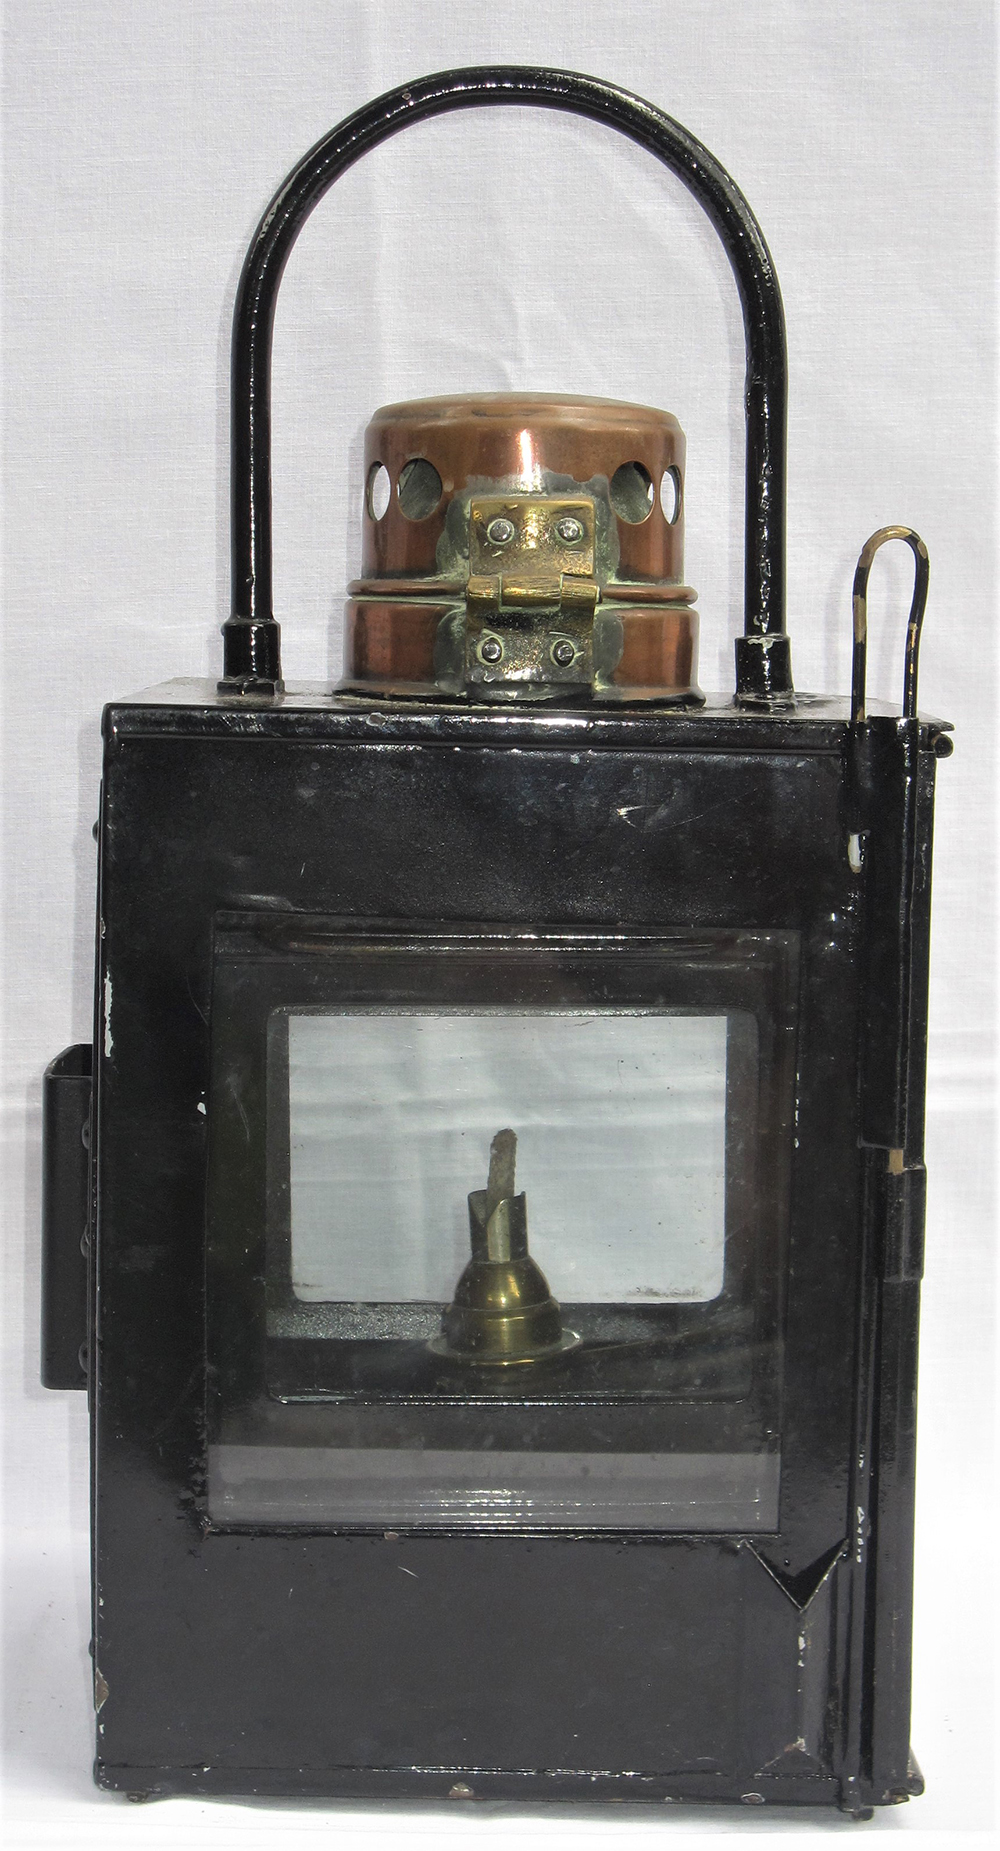 Southern Railway buffer or stop lamp complete with interior, burner and loco bracket. In good